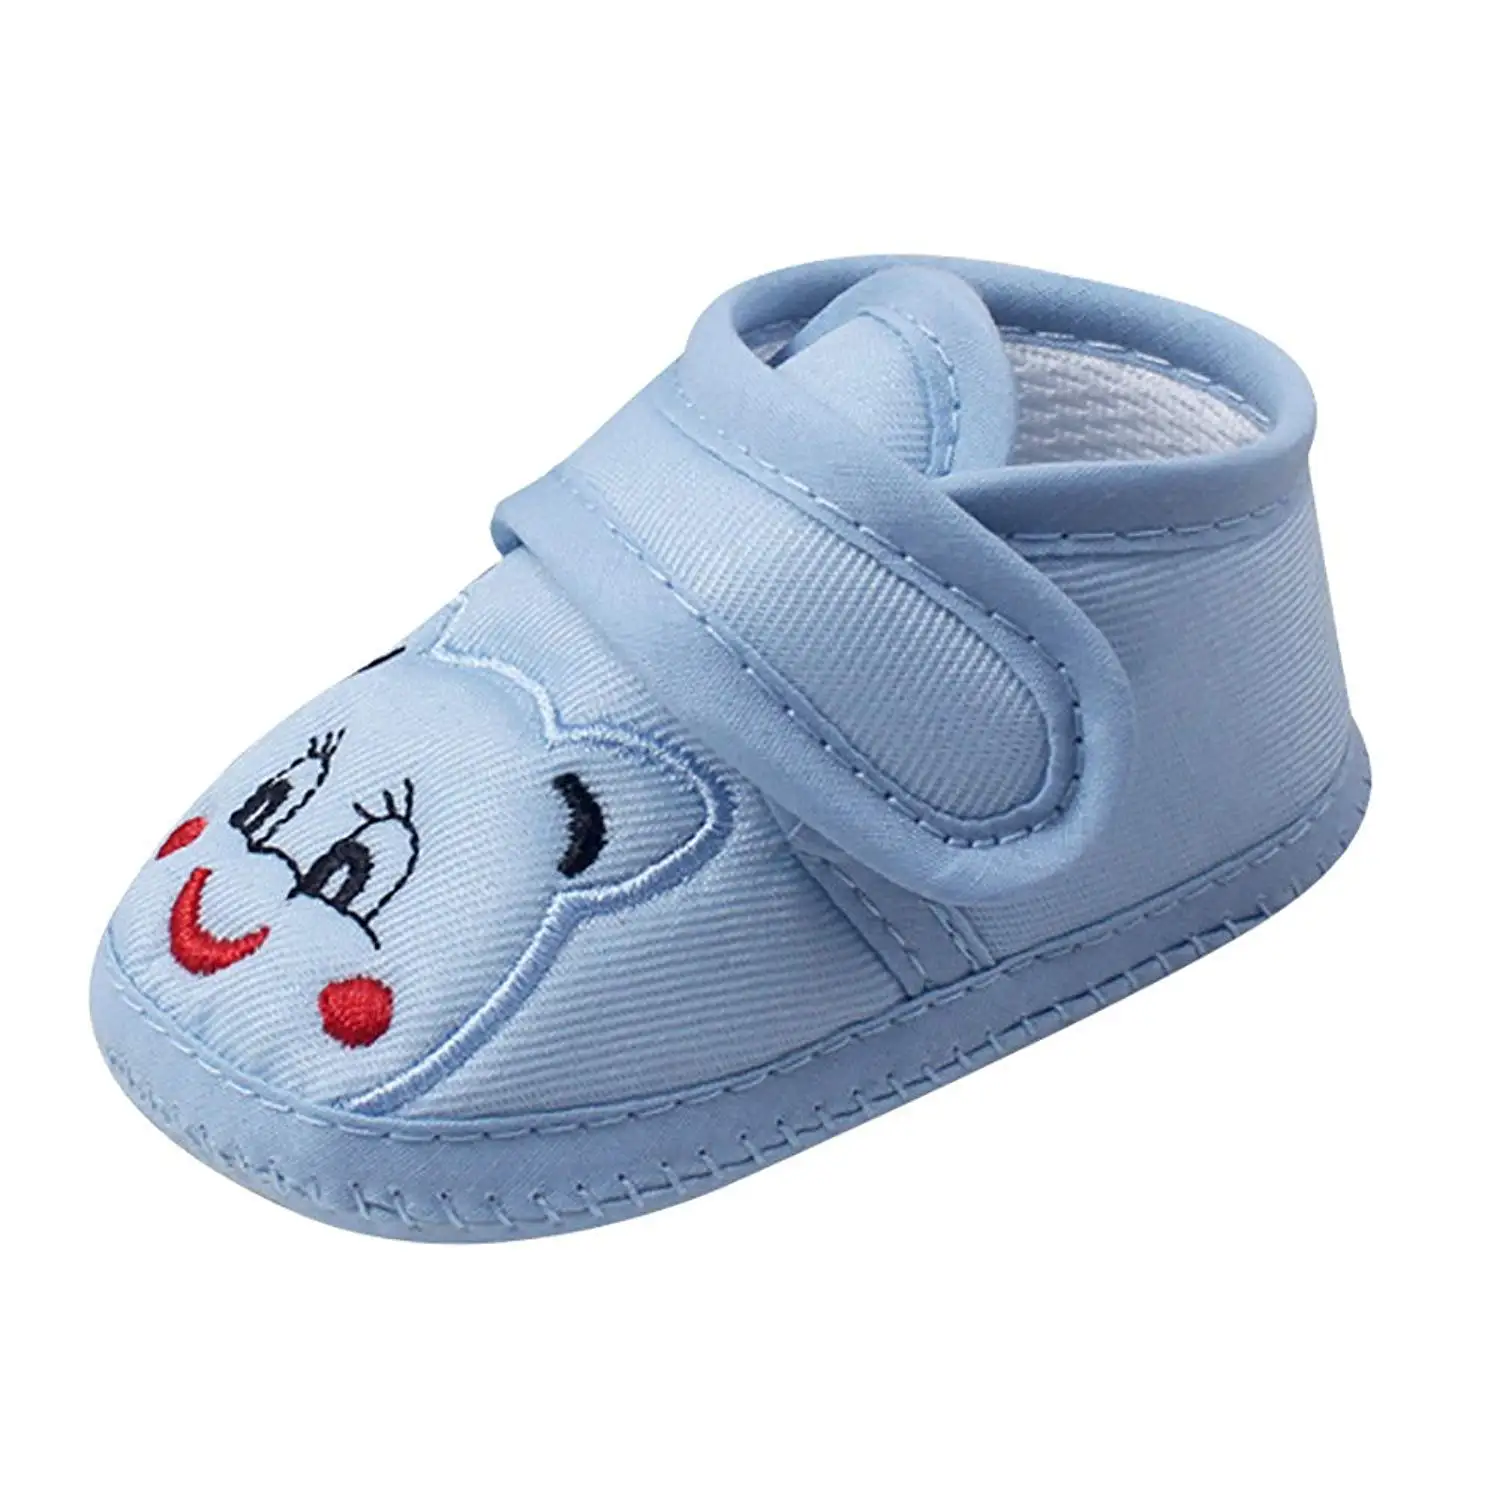 Cheap Baby Shoes 6 9 Months, find Baby 